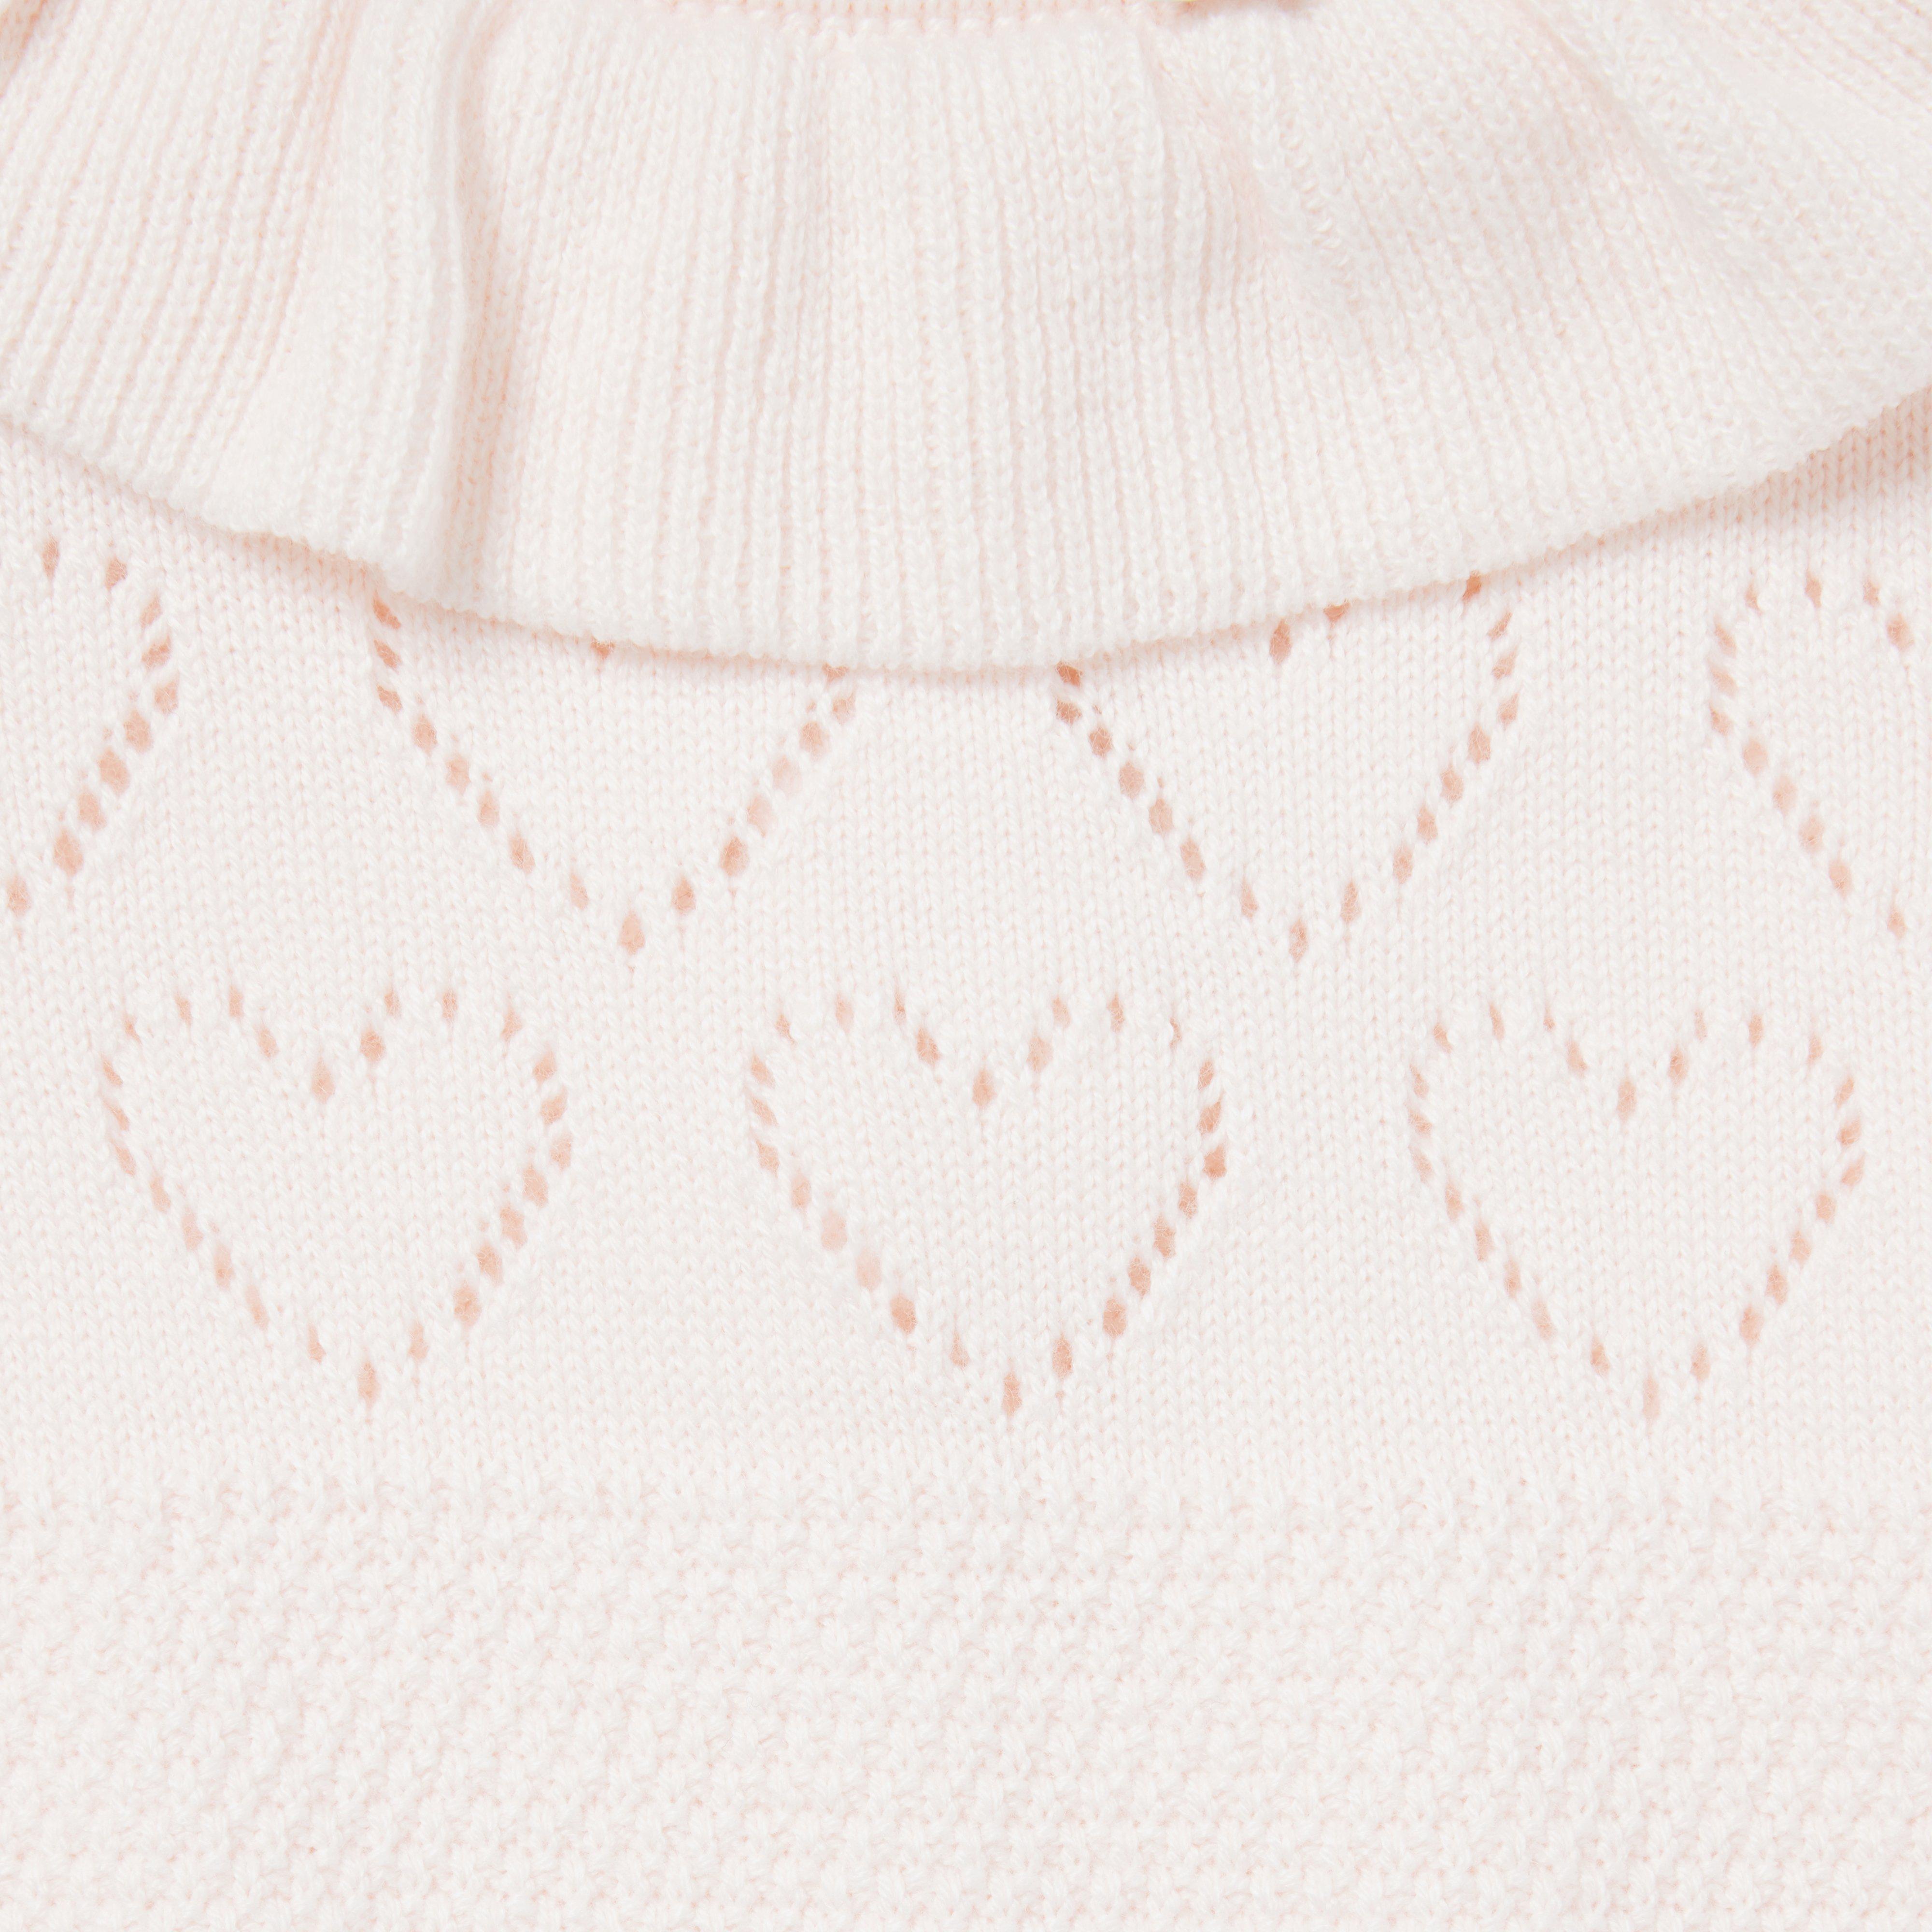 Baby Pointelle Heart Sweater One-Piece